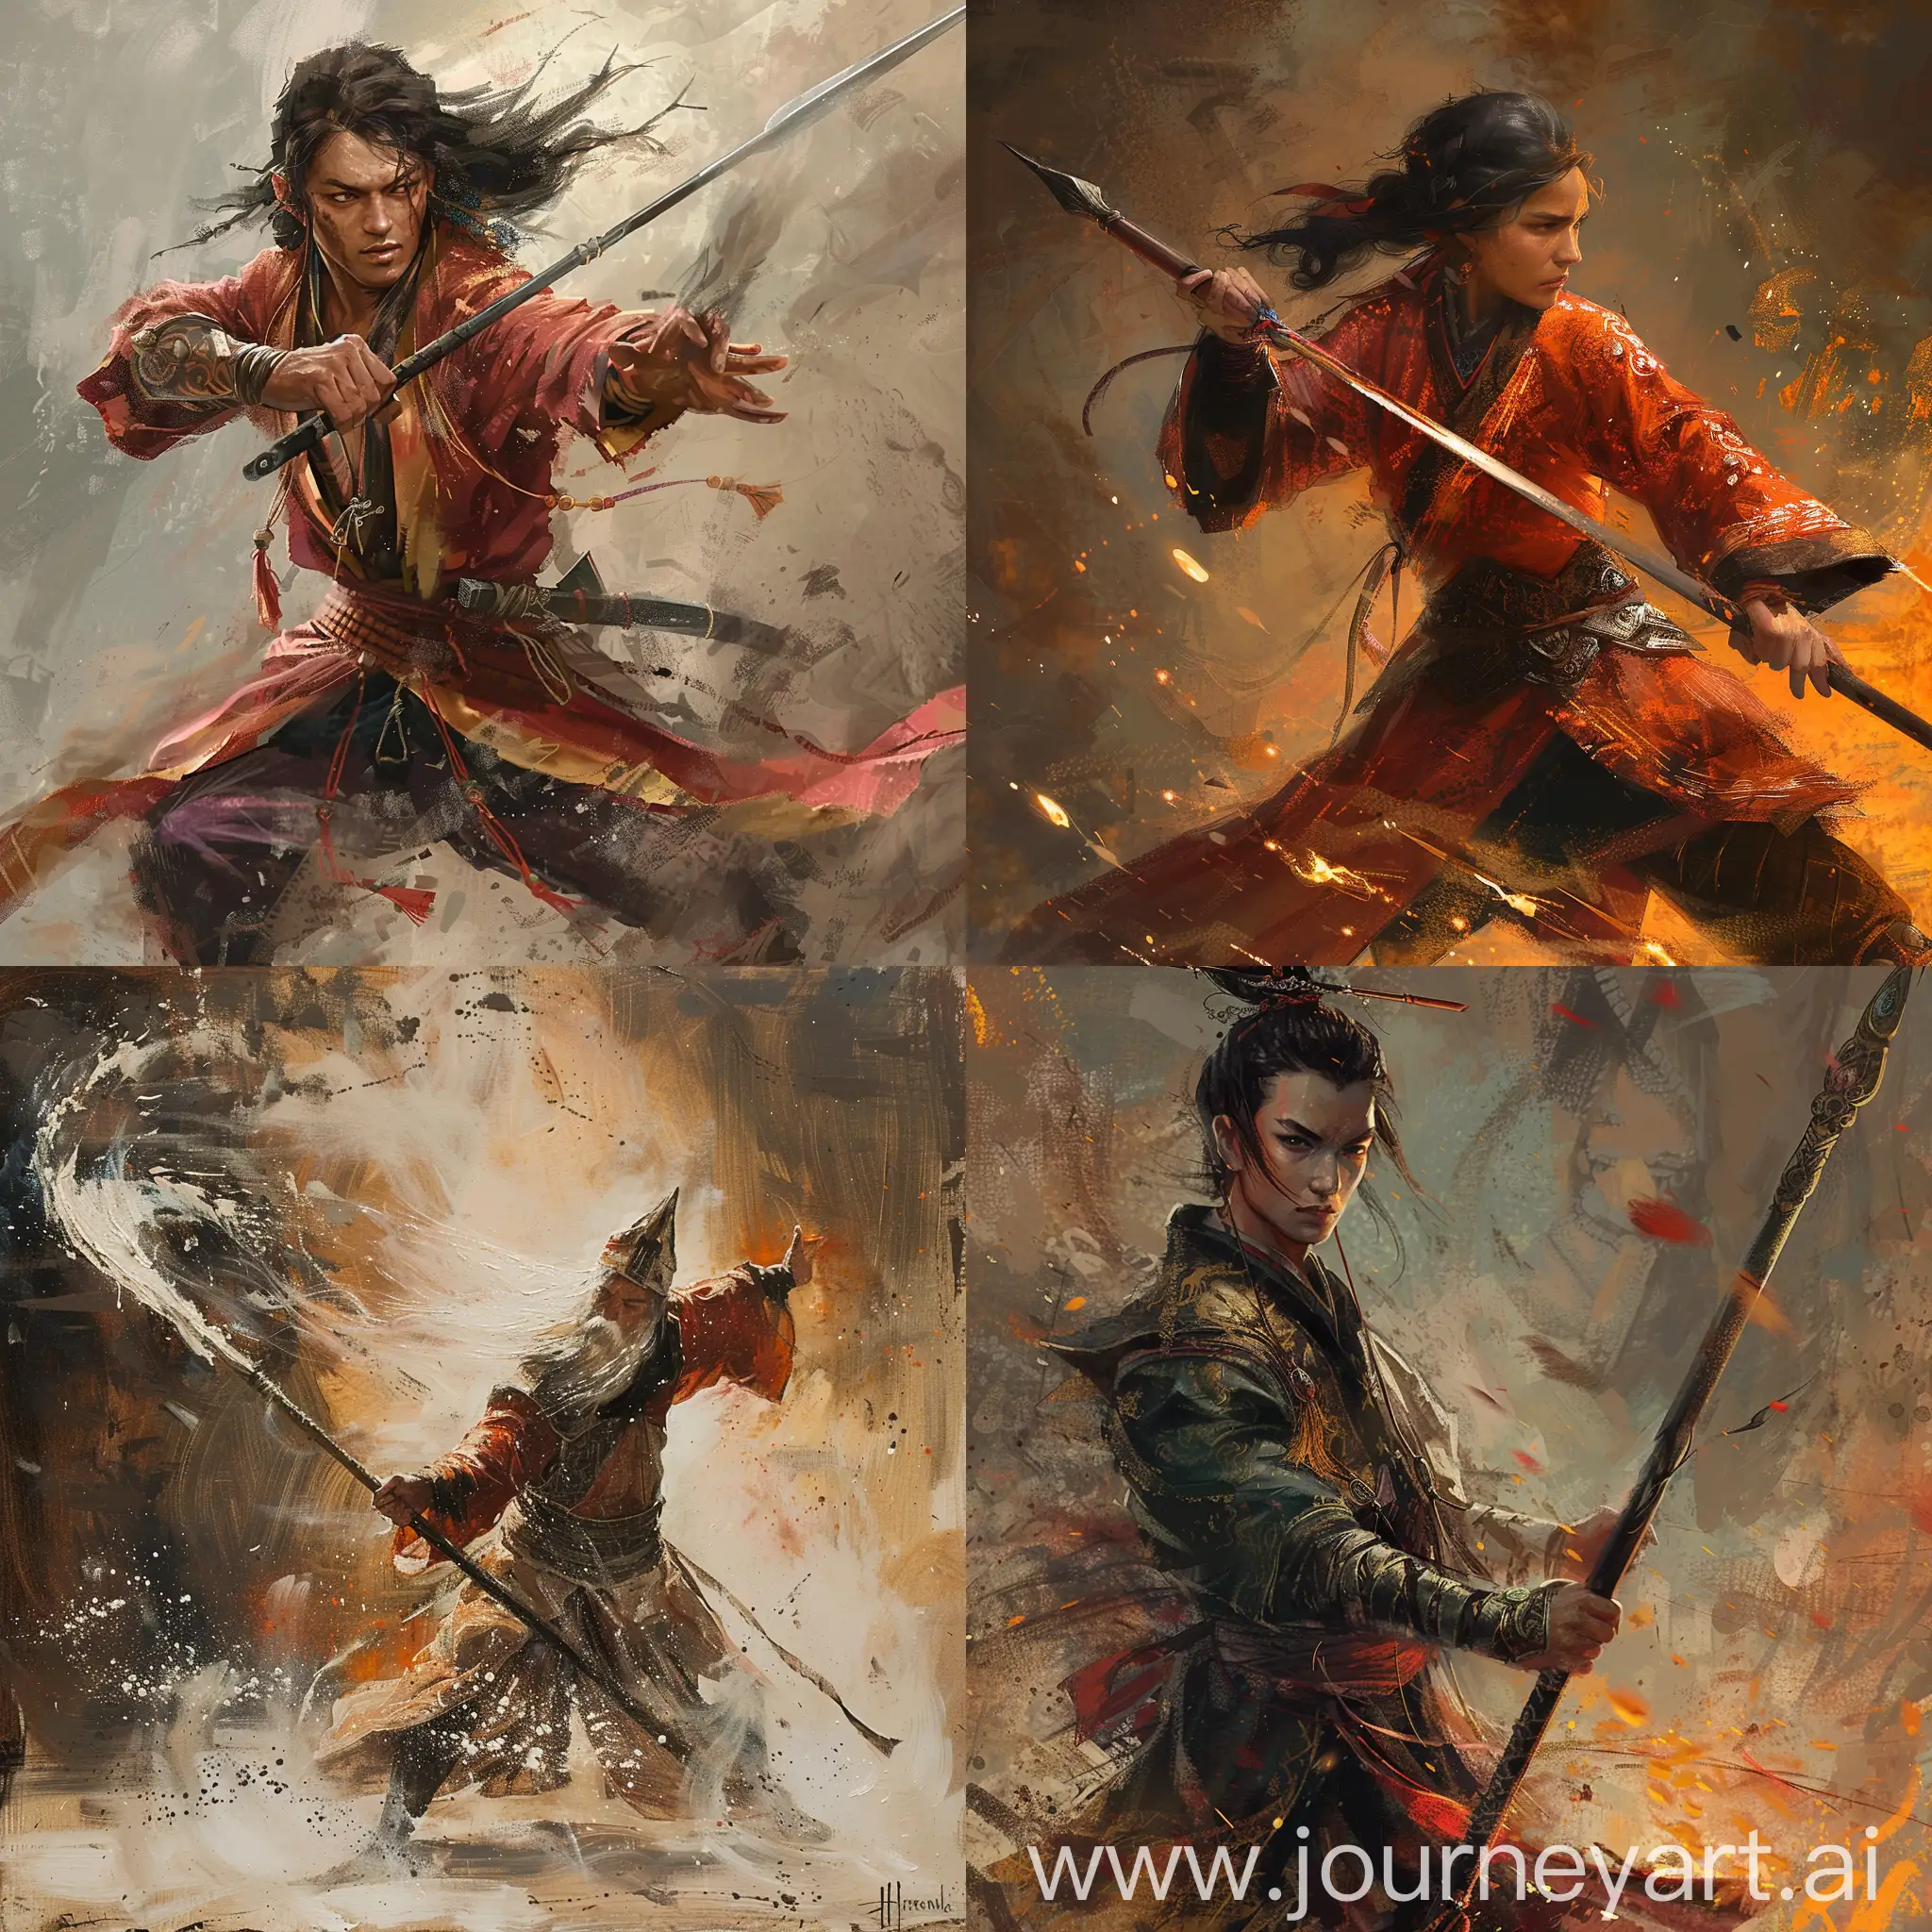 Defensive-Oriental-Battle-Mage-with-Spear-Terese-Nielsen-Oil-Painting-Style